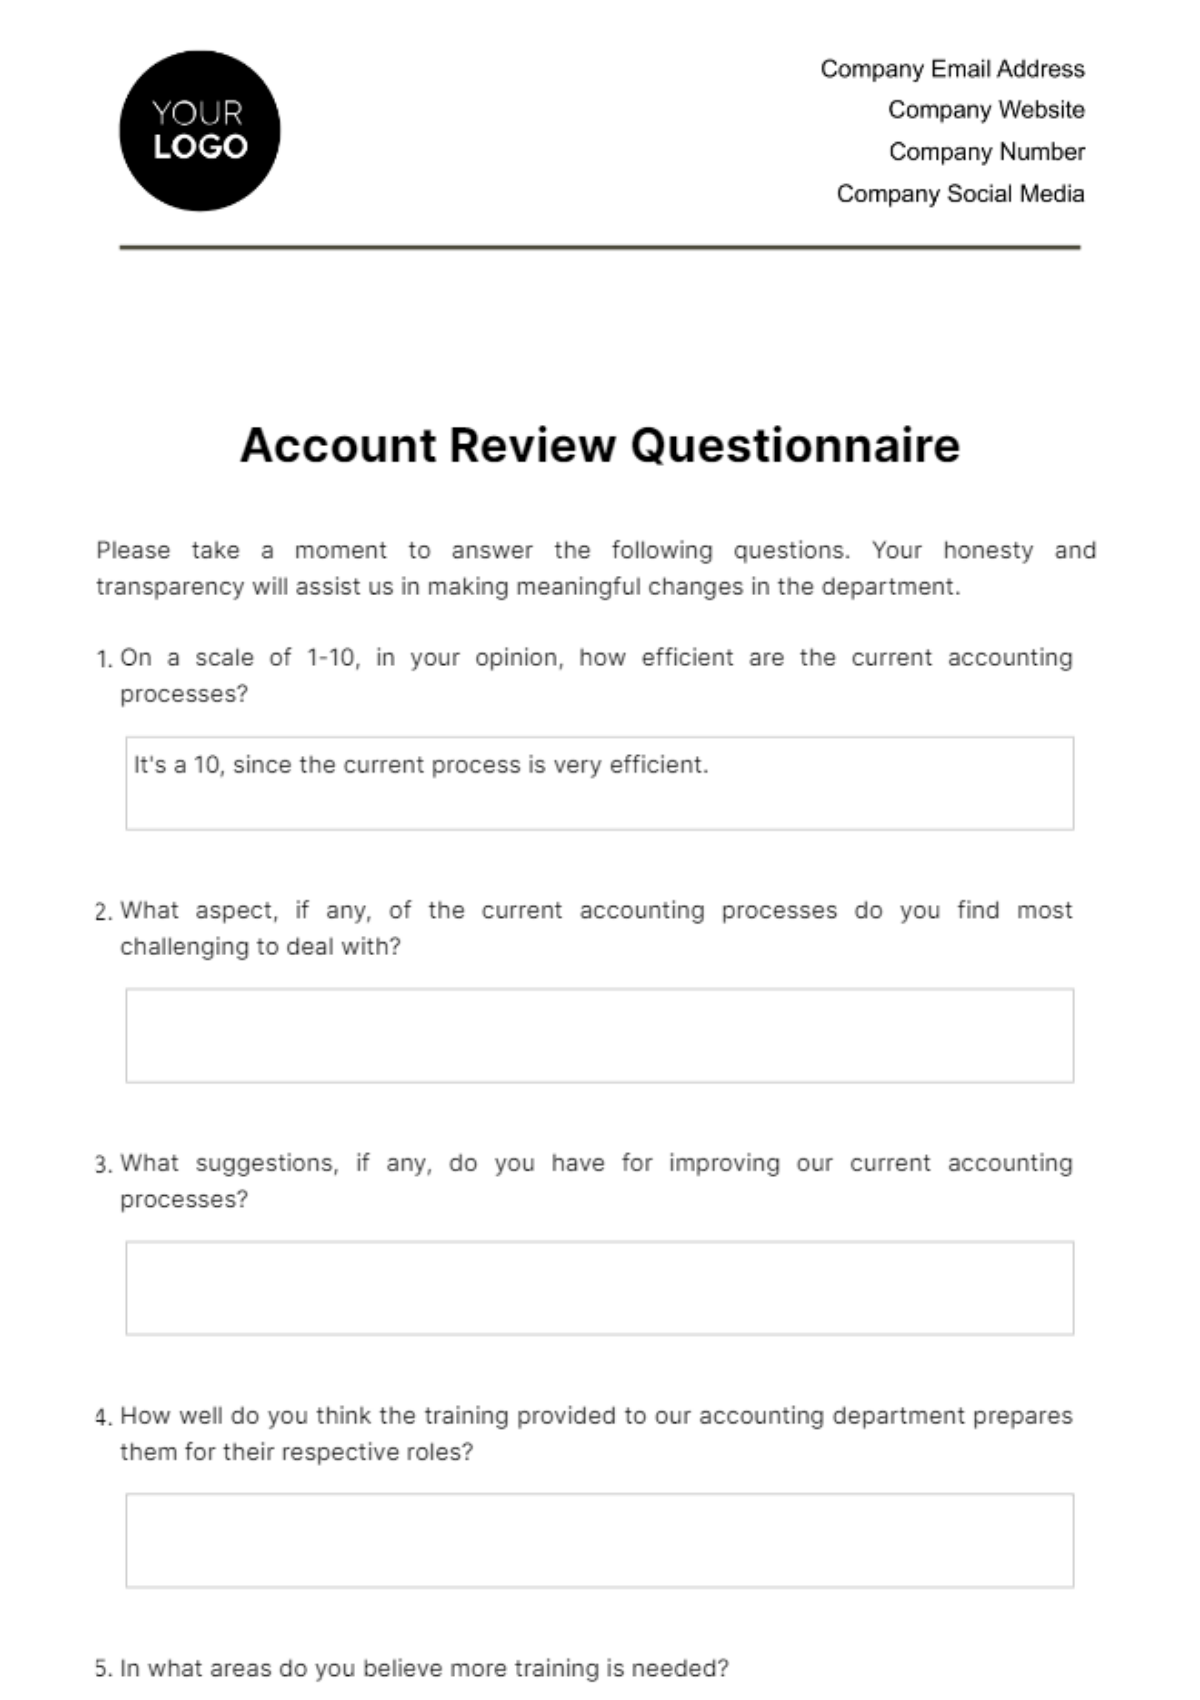 Account Review Questionnaire Template